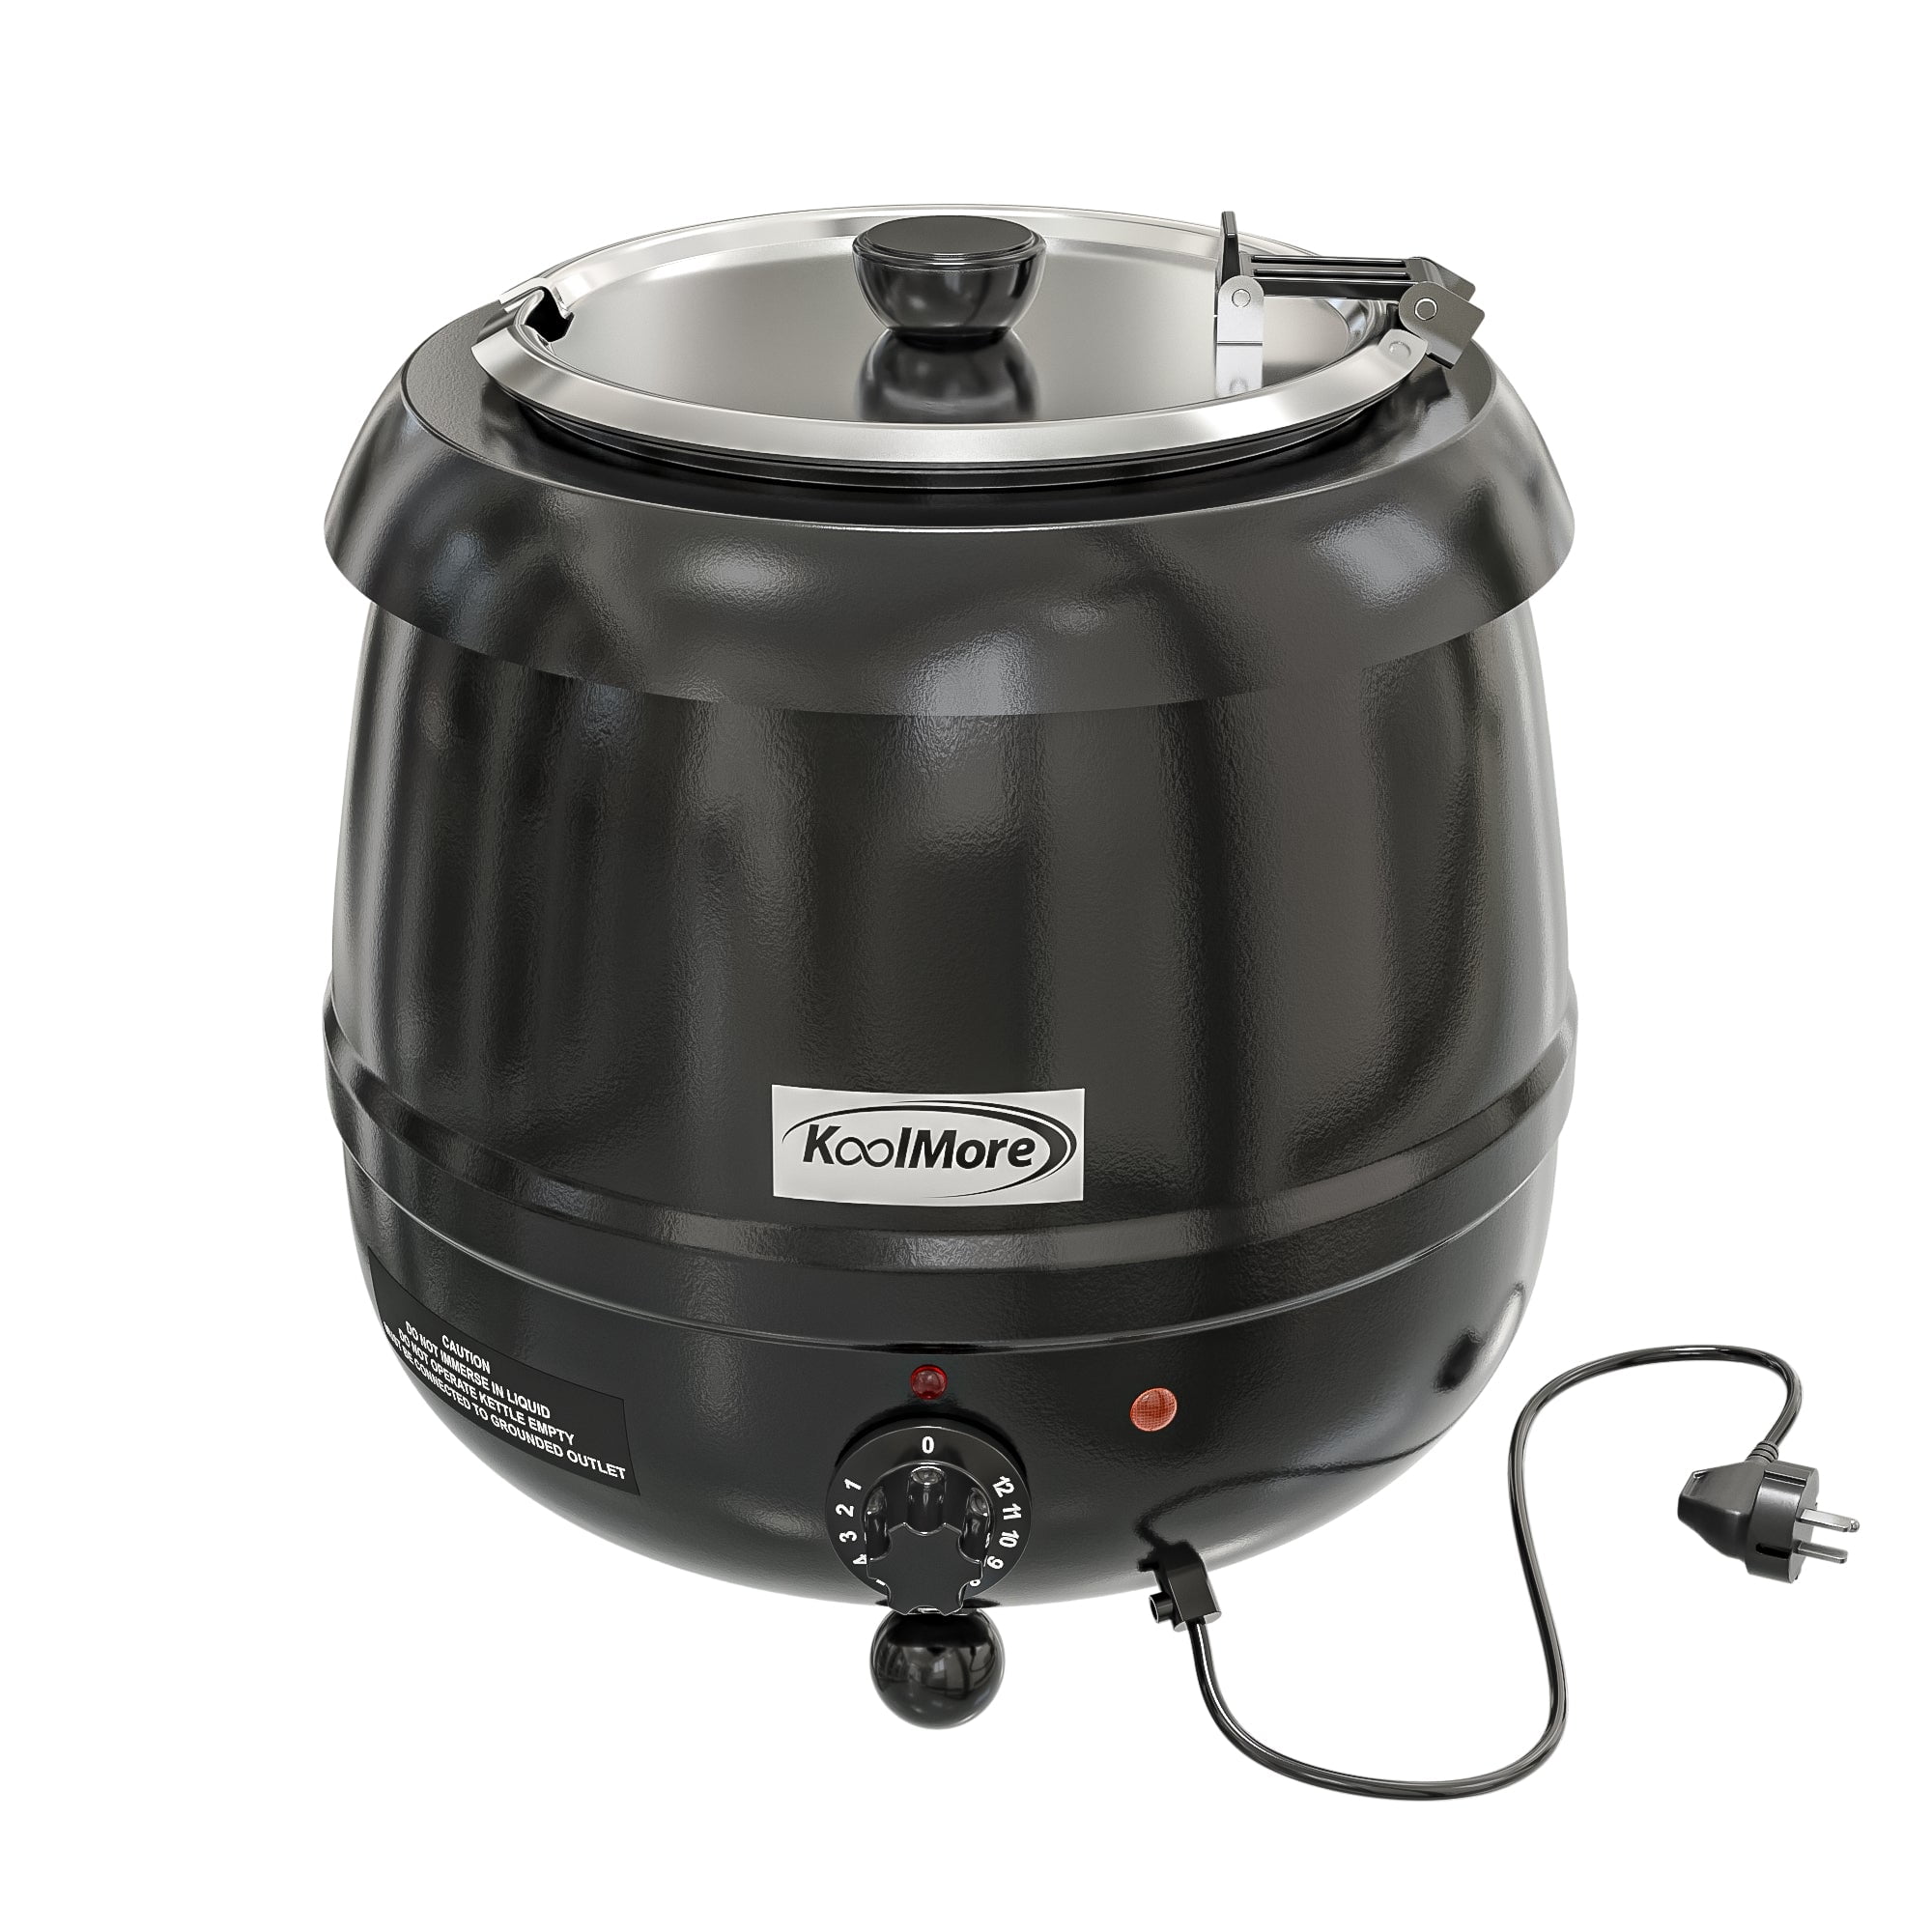 Buffet Equipment 13L 600W Black Iron Painted Stainless Steel Food Tank  Commercial Portable Soup Warmer - Buy Buffet Equipment 13L 600W Black Iron  Painted Stainless Steel Food Tank Commercial Portable Soup Warmer